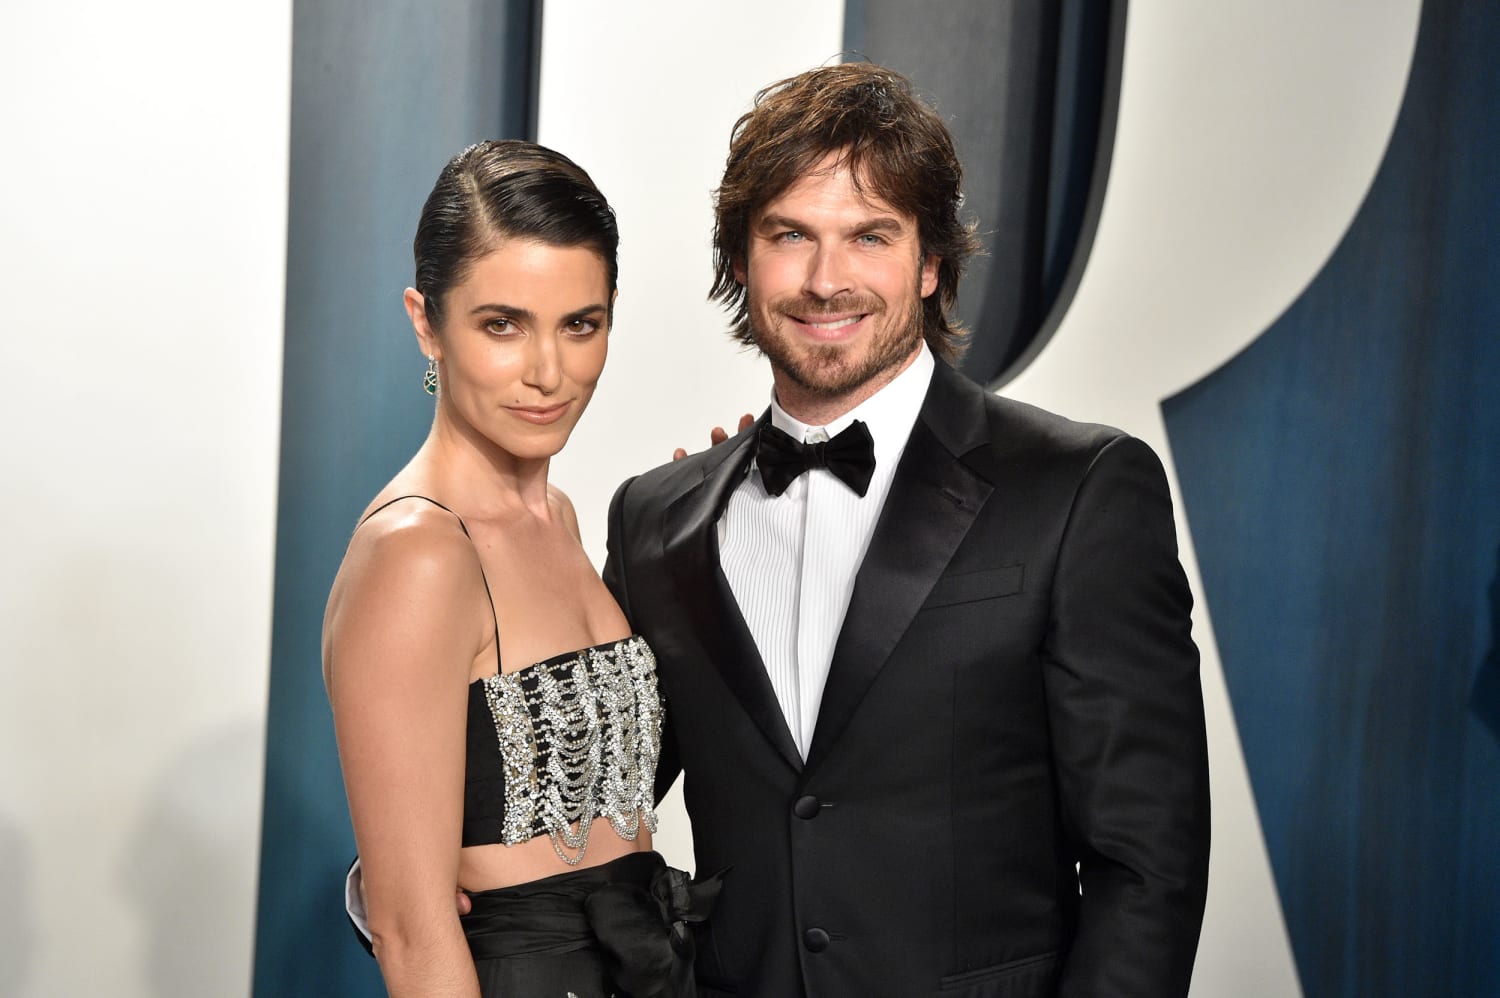 Ian Somerhalder Credits Wife Nikki Reed For Getting Him Out Of Debt.